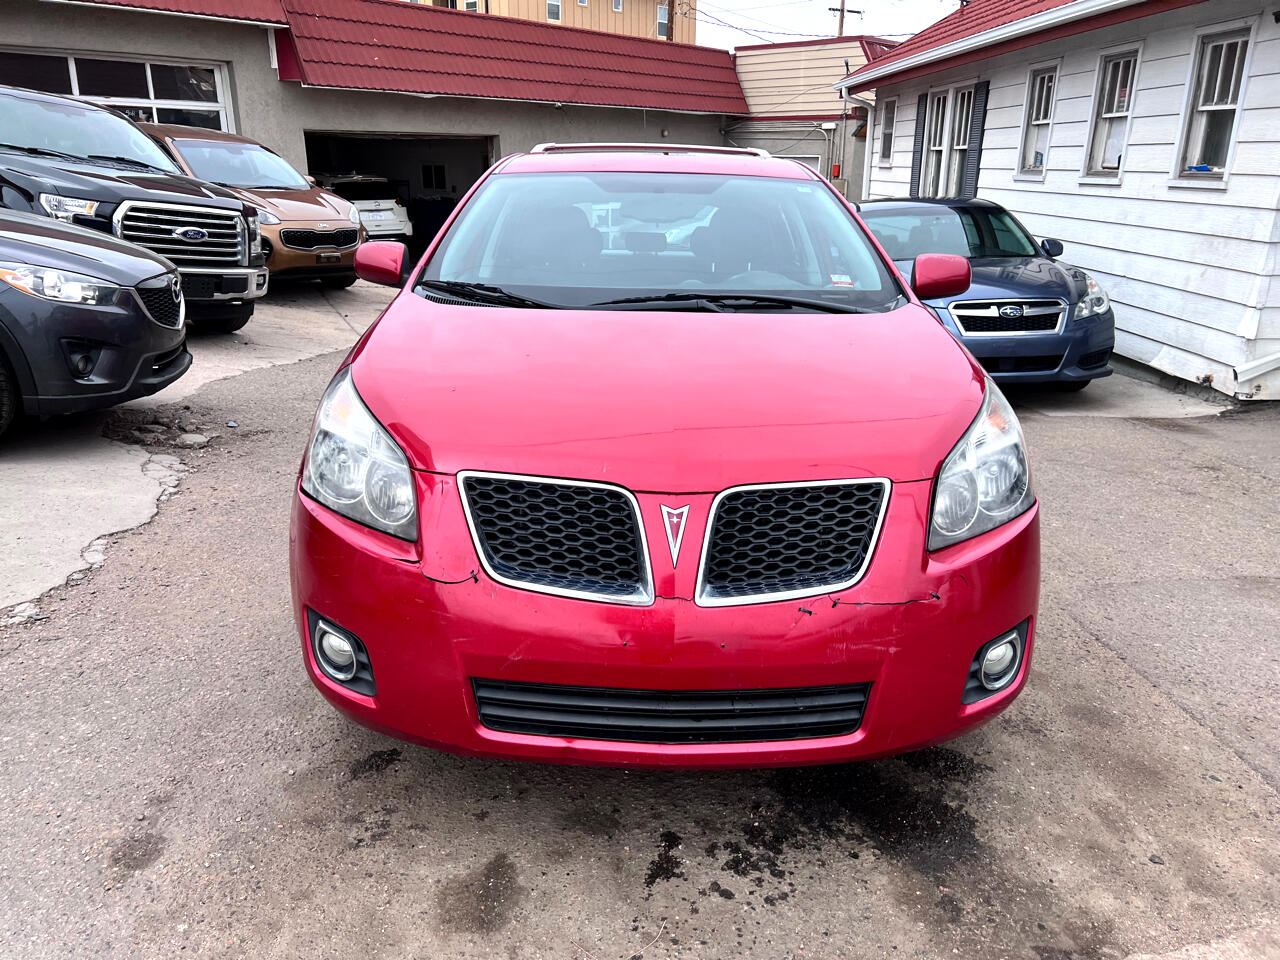 Used 2009 Pontiac Vibe AWD with VIN 5Y2SM670X9Z429581 for sale in Denver, CO